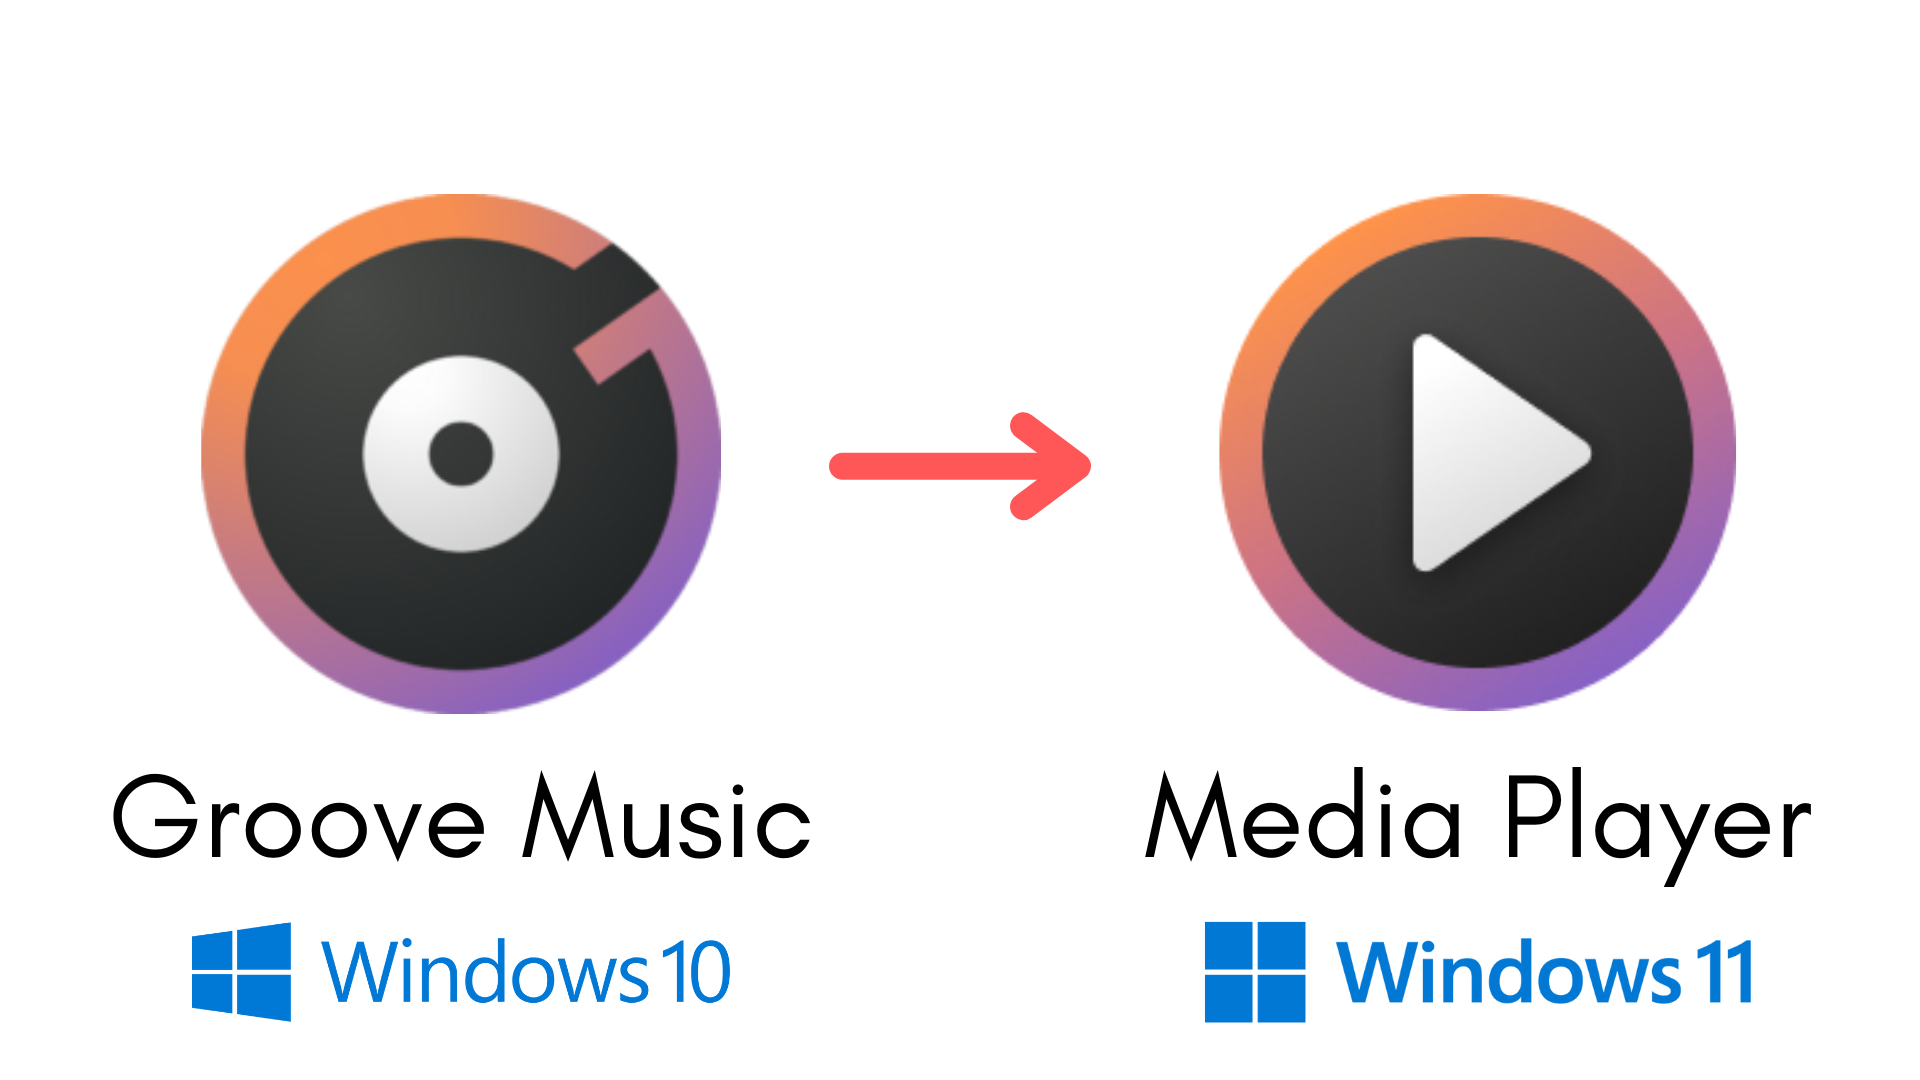 Windows 11 is Getting A New Media Player - 30